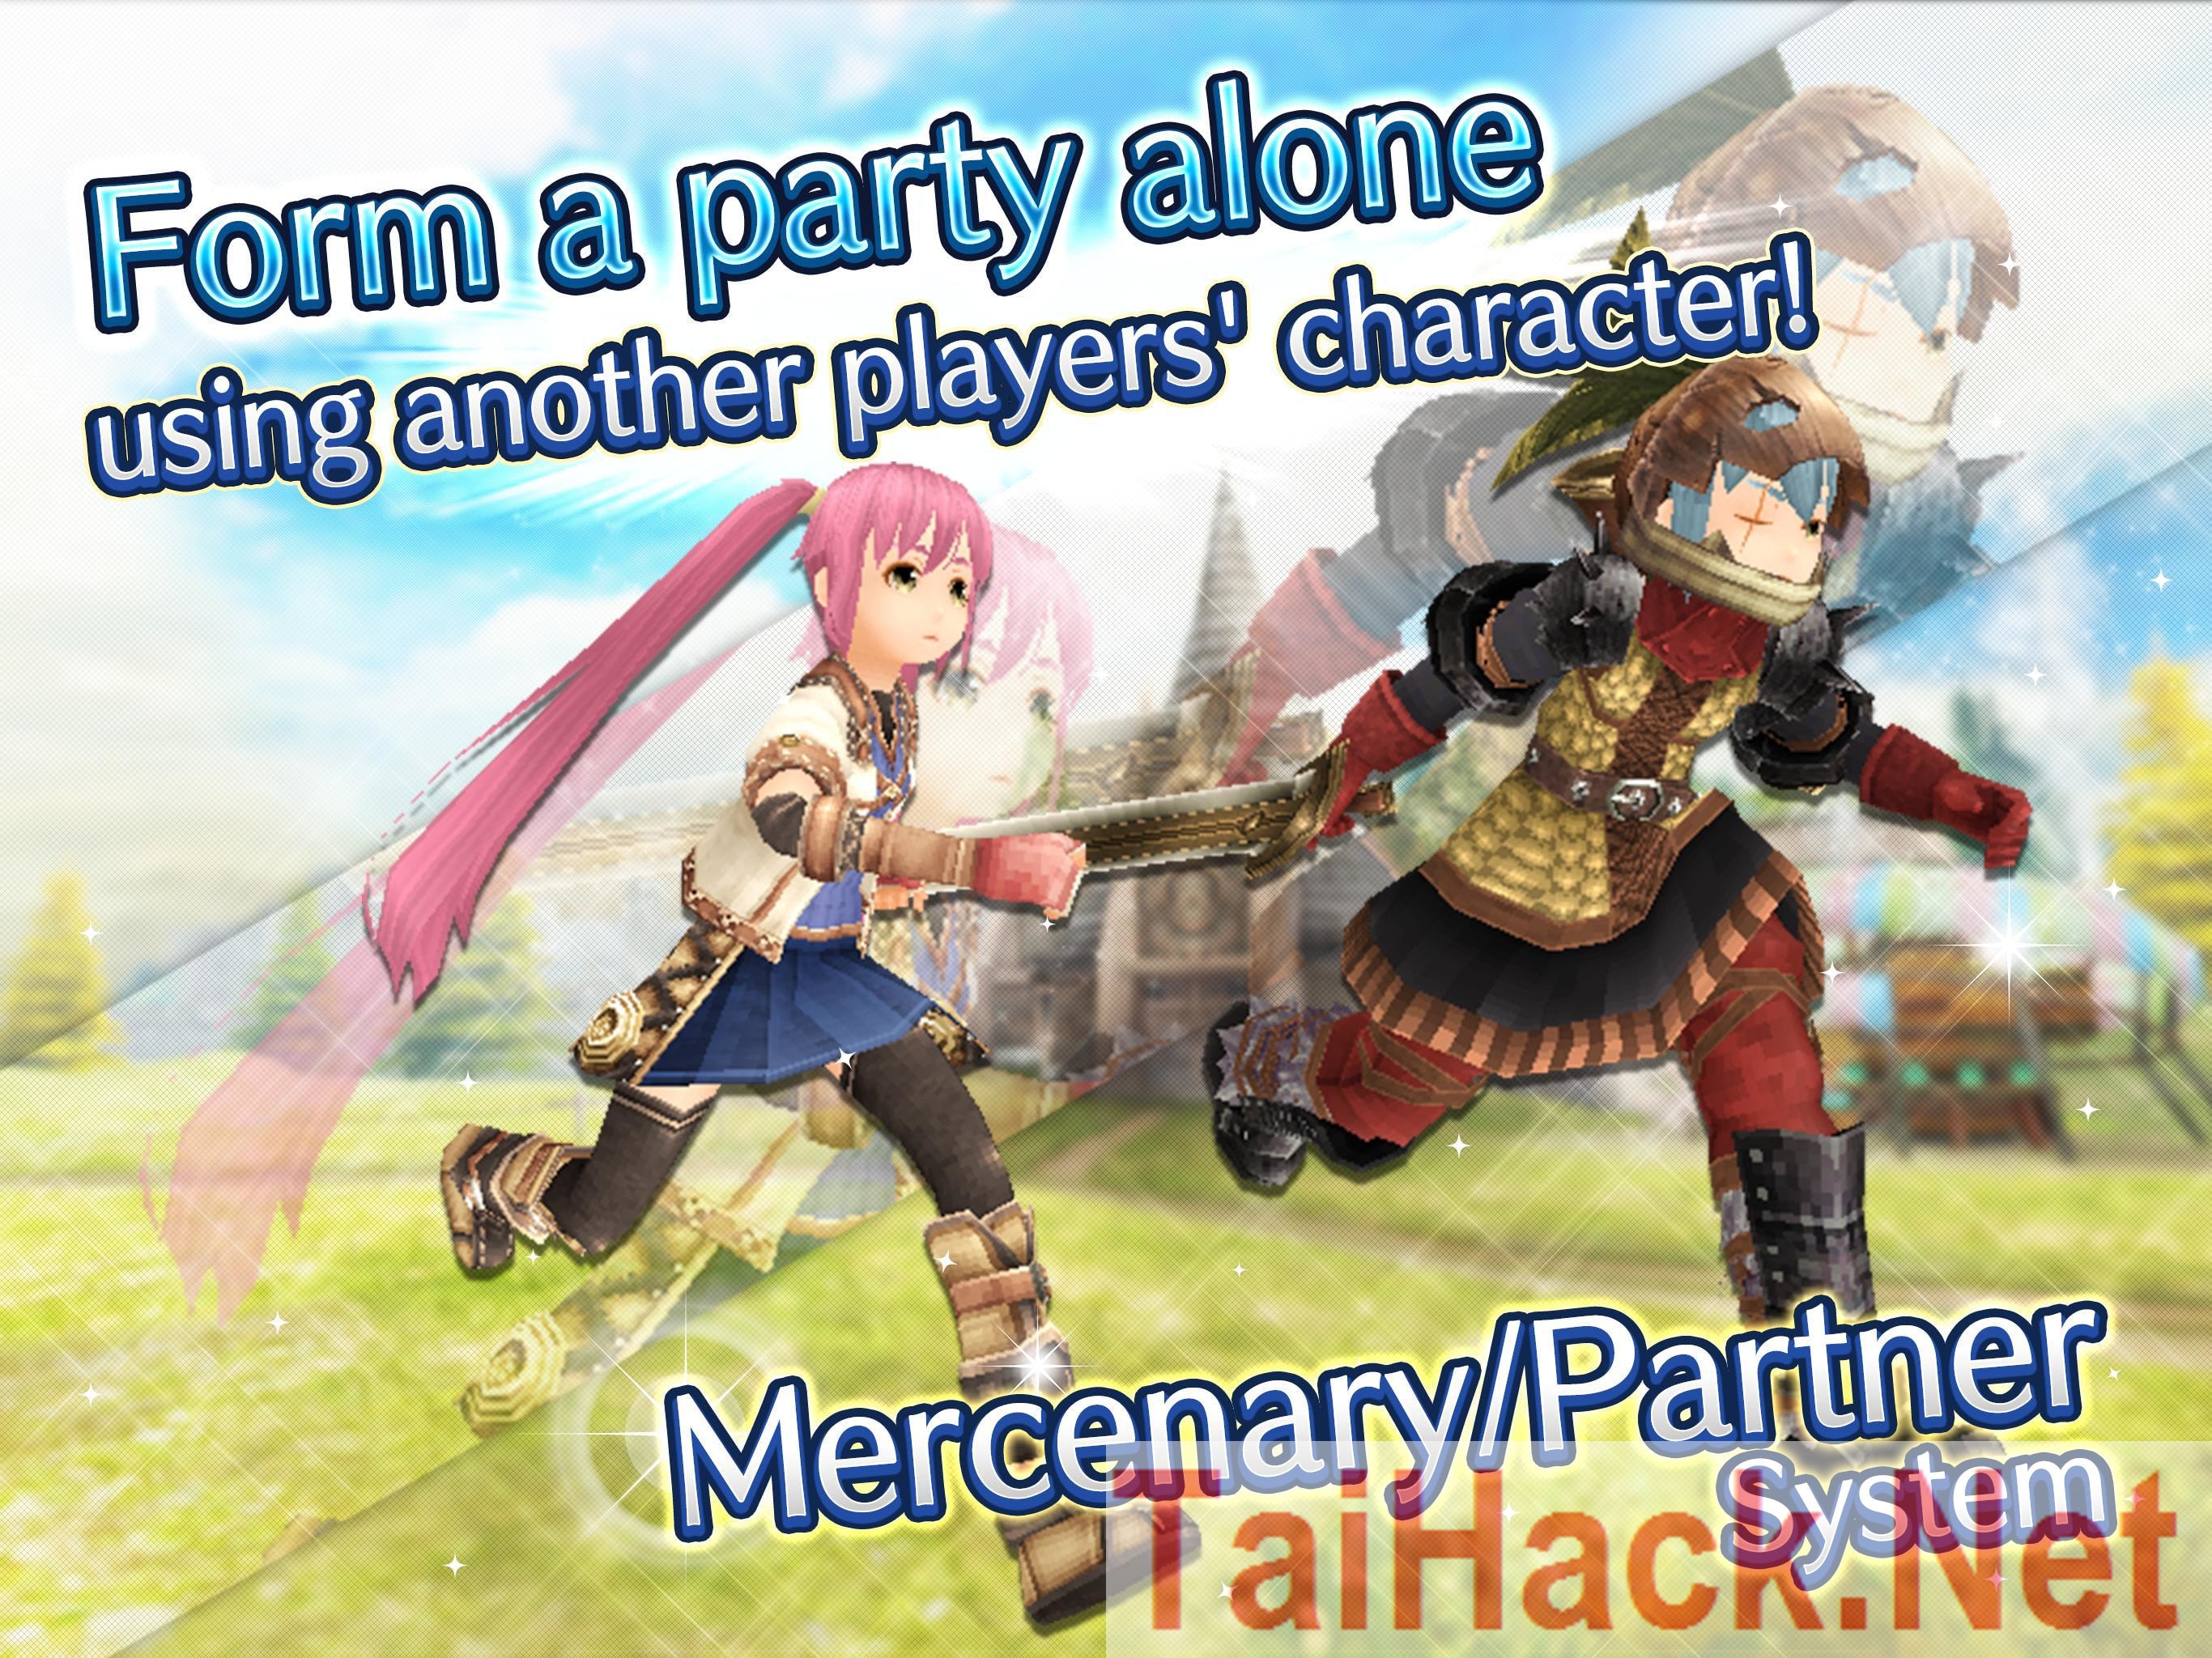 Download Hack New Version - Toram Online Hack Mod for iOS. Best action role-playing game of all time, with this hack you are provided with all the features that help you become a pro in this game. For example, Hight Rate Critical, God mode and many more new features are waiting for you to explore ahead. Update all the latest game hacks at TaiHack.Net.